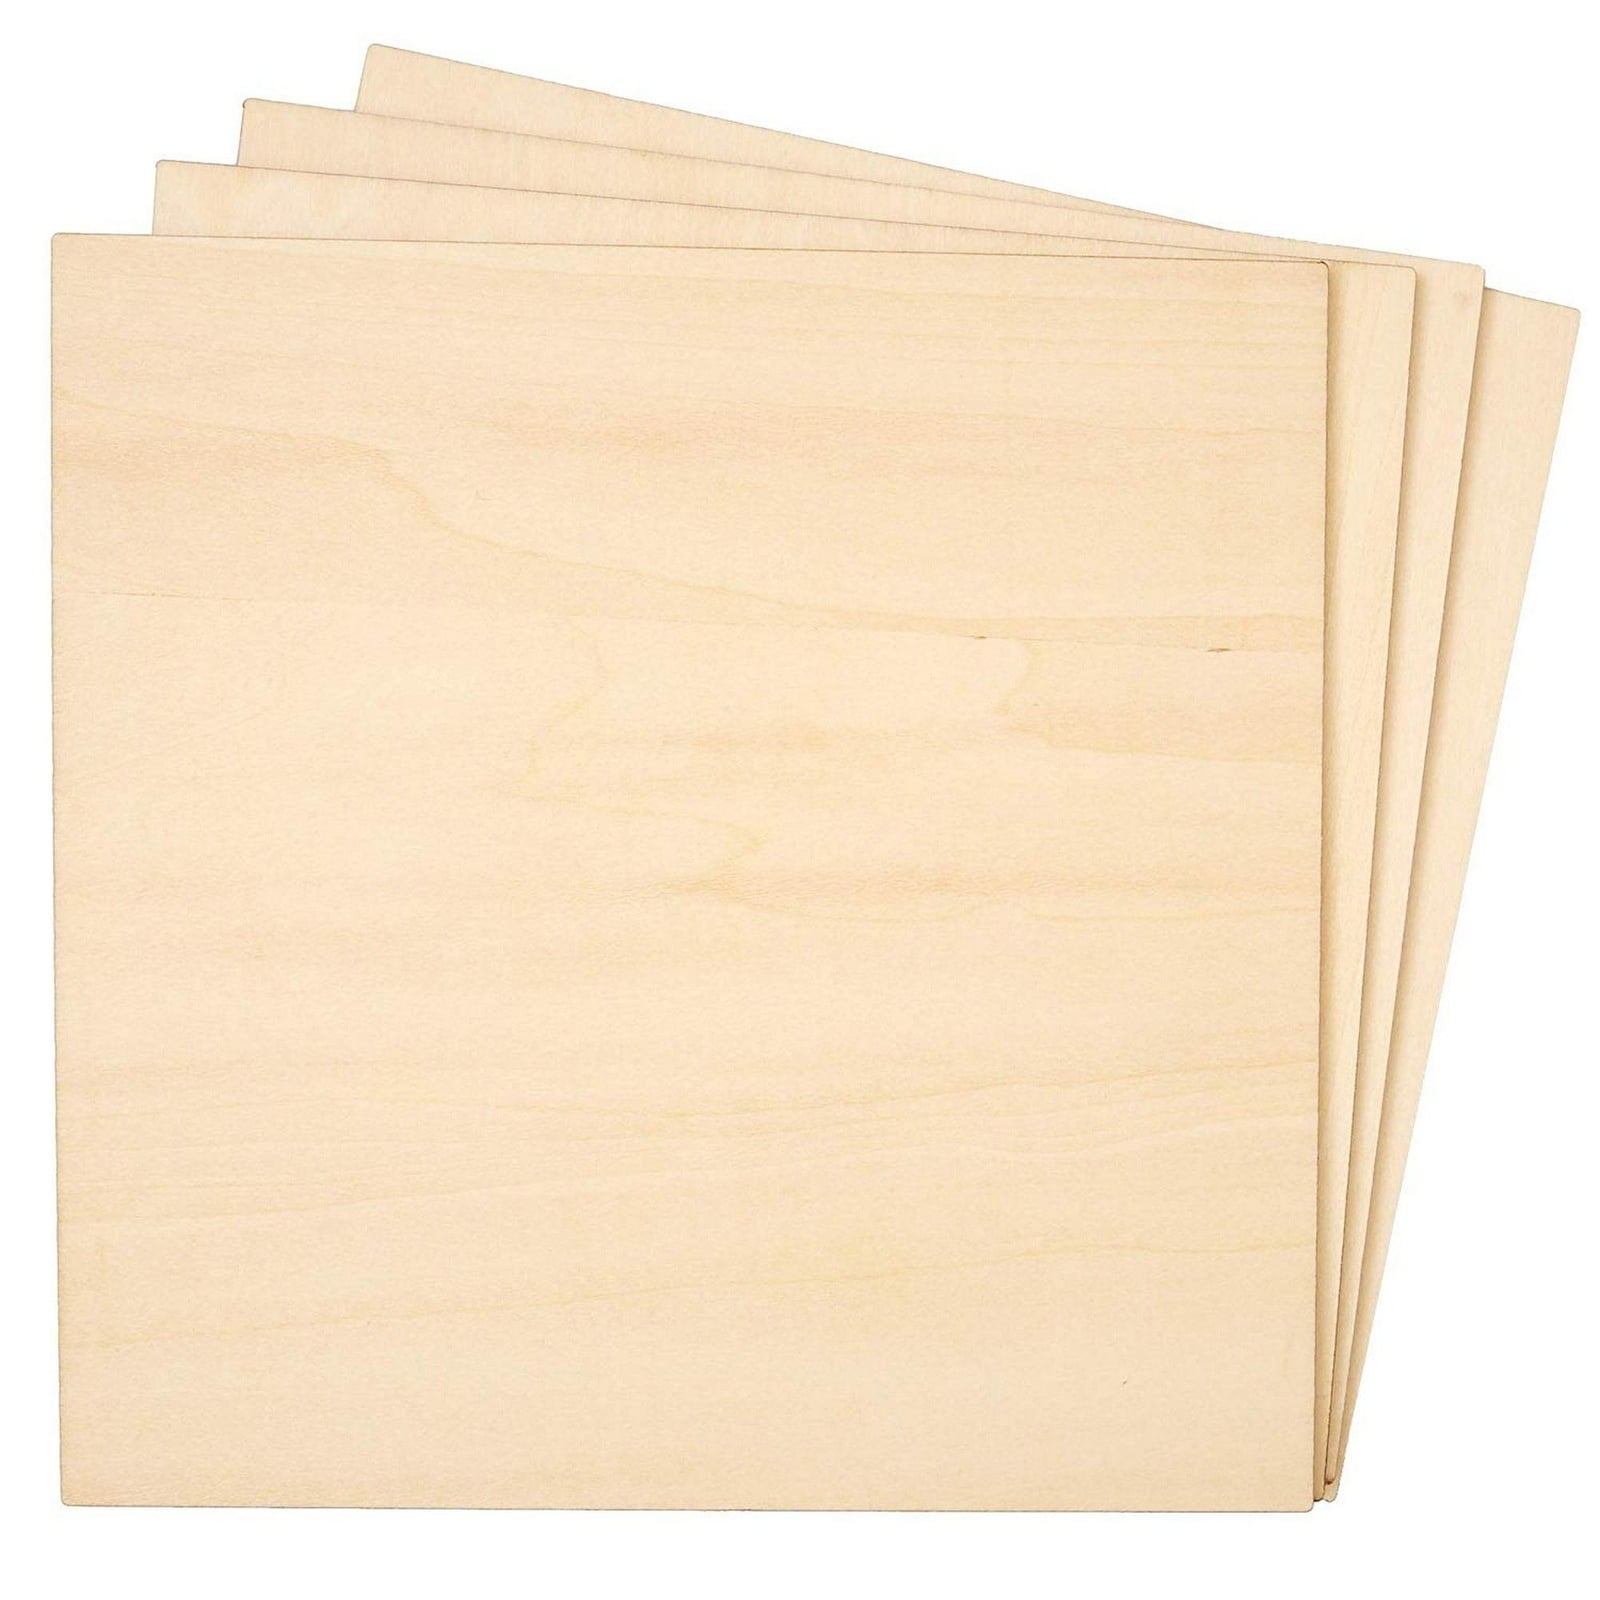 Adrattnay Basswood Sheets 1/8 x 12 x 12 inch - 3mm Basswood Sheets Plywood  Sheets, 8Pcs Square Unfinished Wood Board for DIY Crafts, Laser Cutting